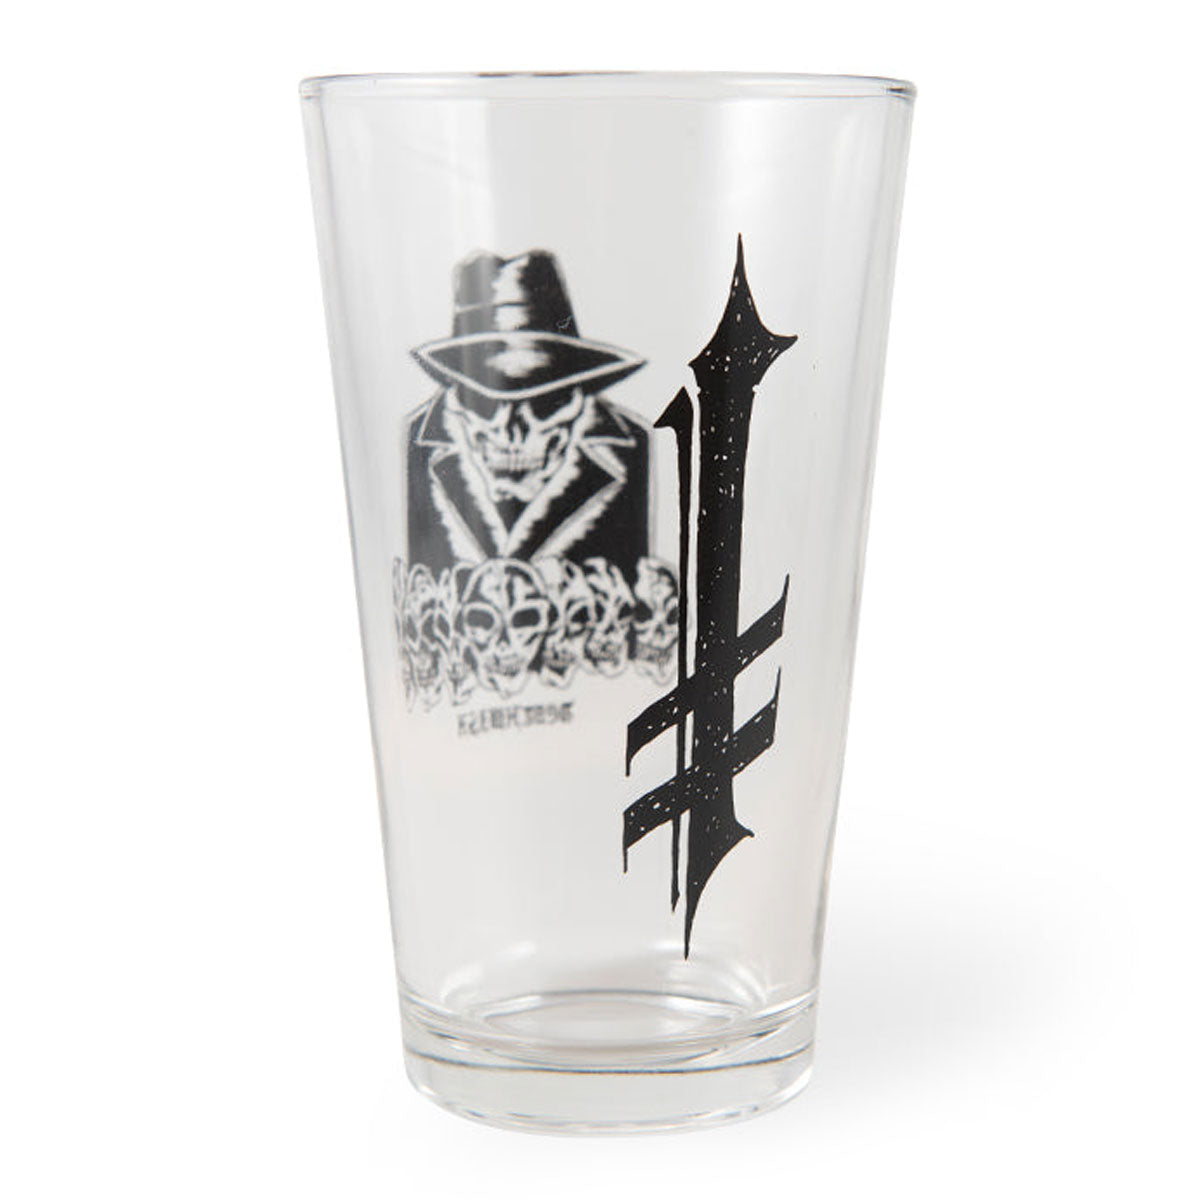 Deathwish Dealers Choice Pint Glass image 1